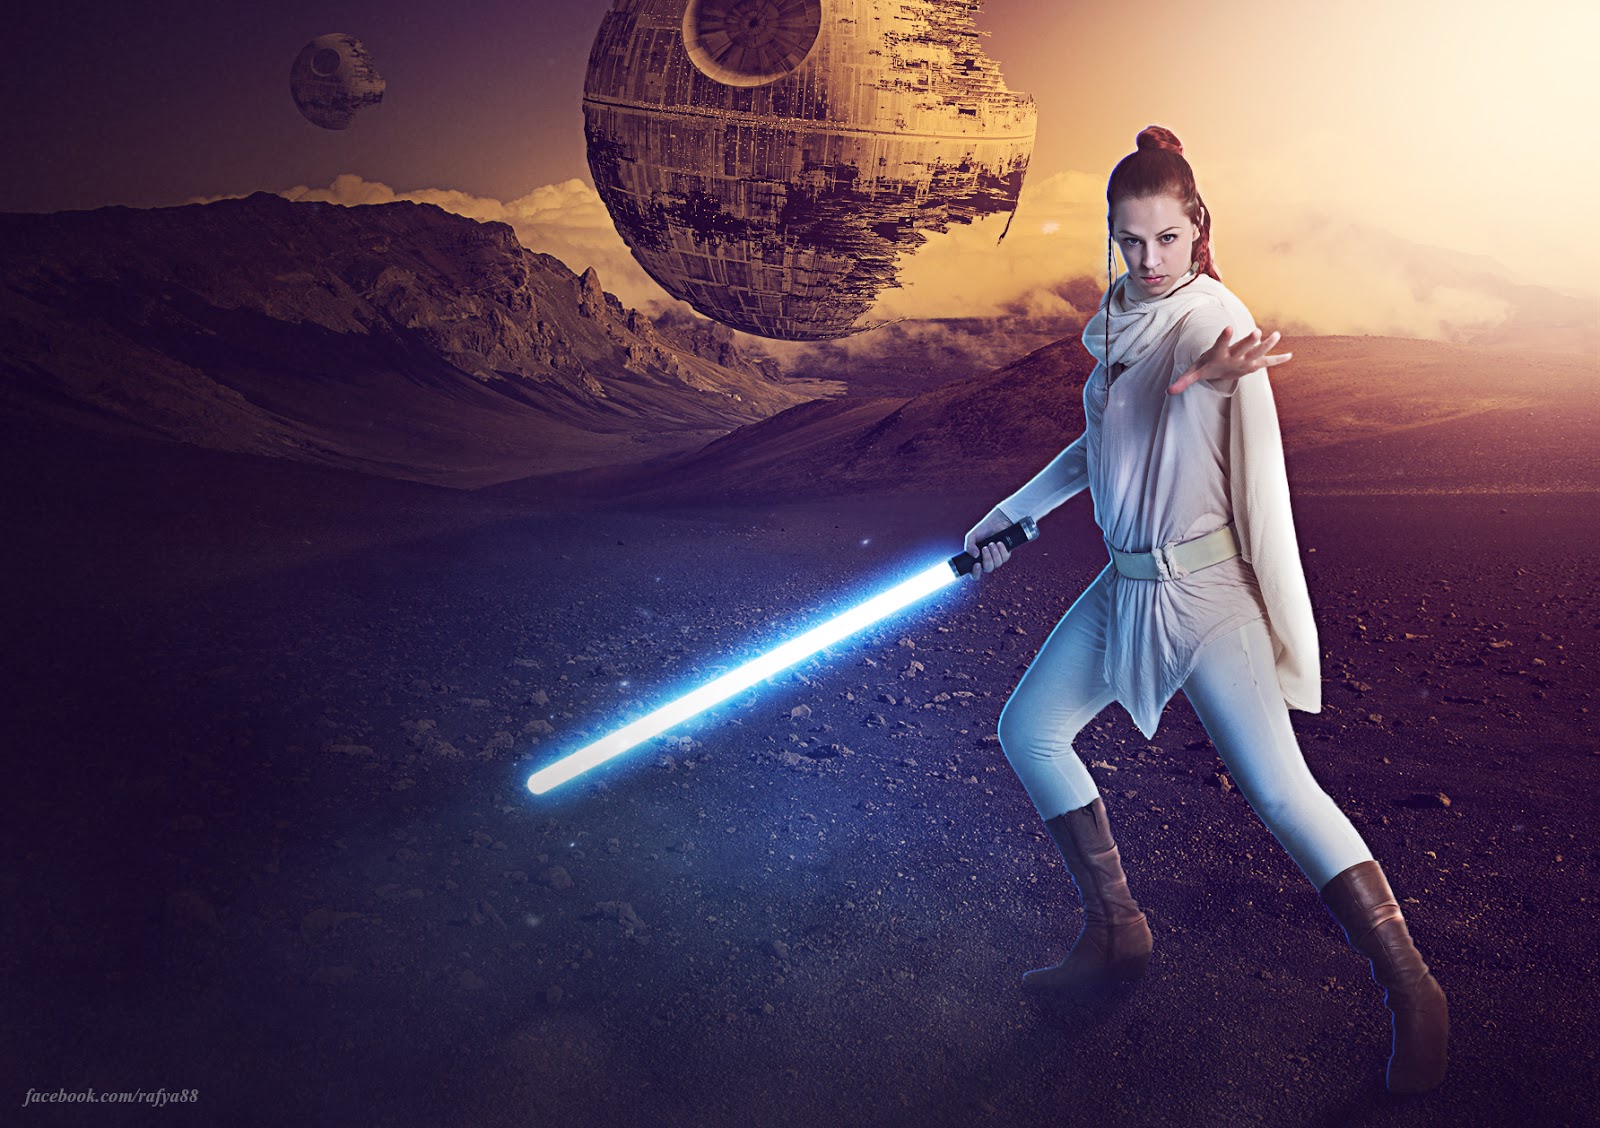 How To Make Star Wars Photo Scene In Photoshop - rafy A